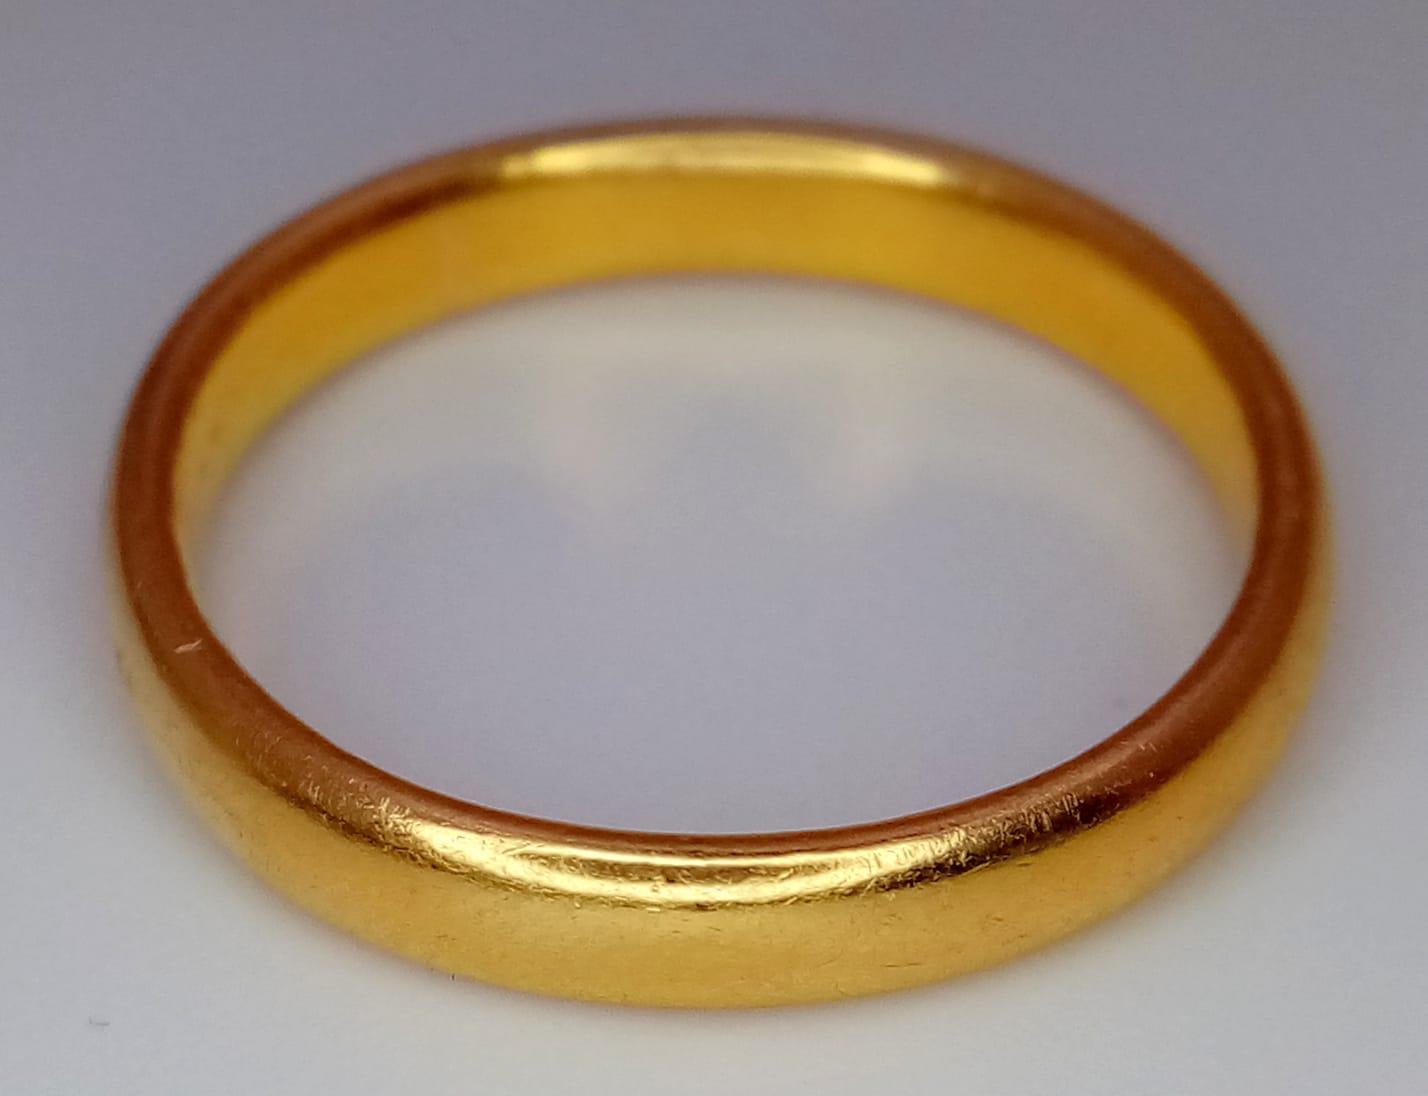 A Vintage 22K Yellow Gold Band Ring. Size P. 5.11g weight. Full UK hallmarks. - Image 3 of 4